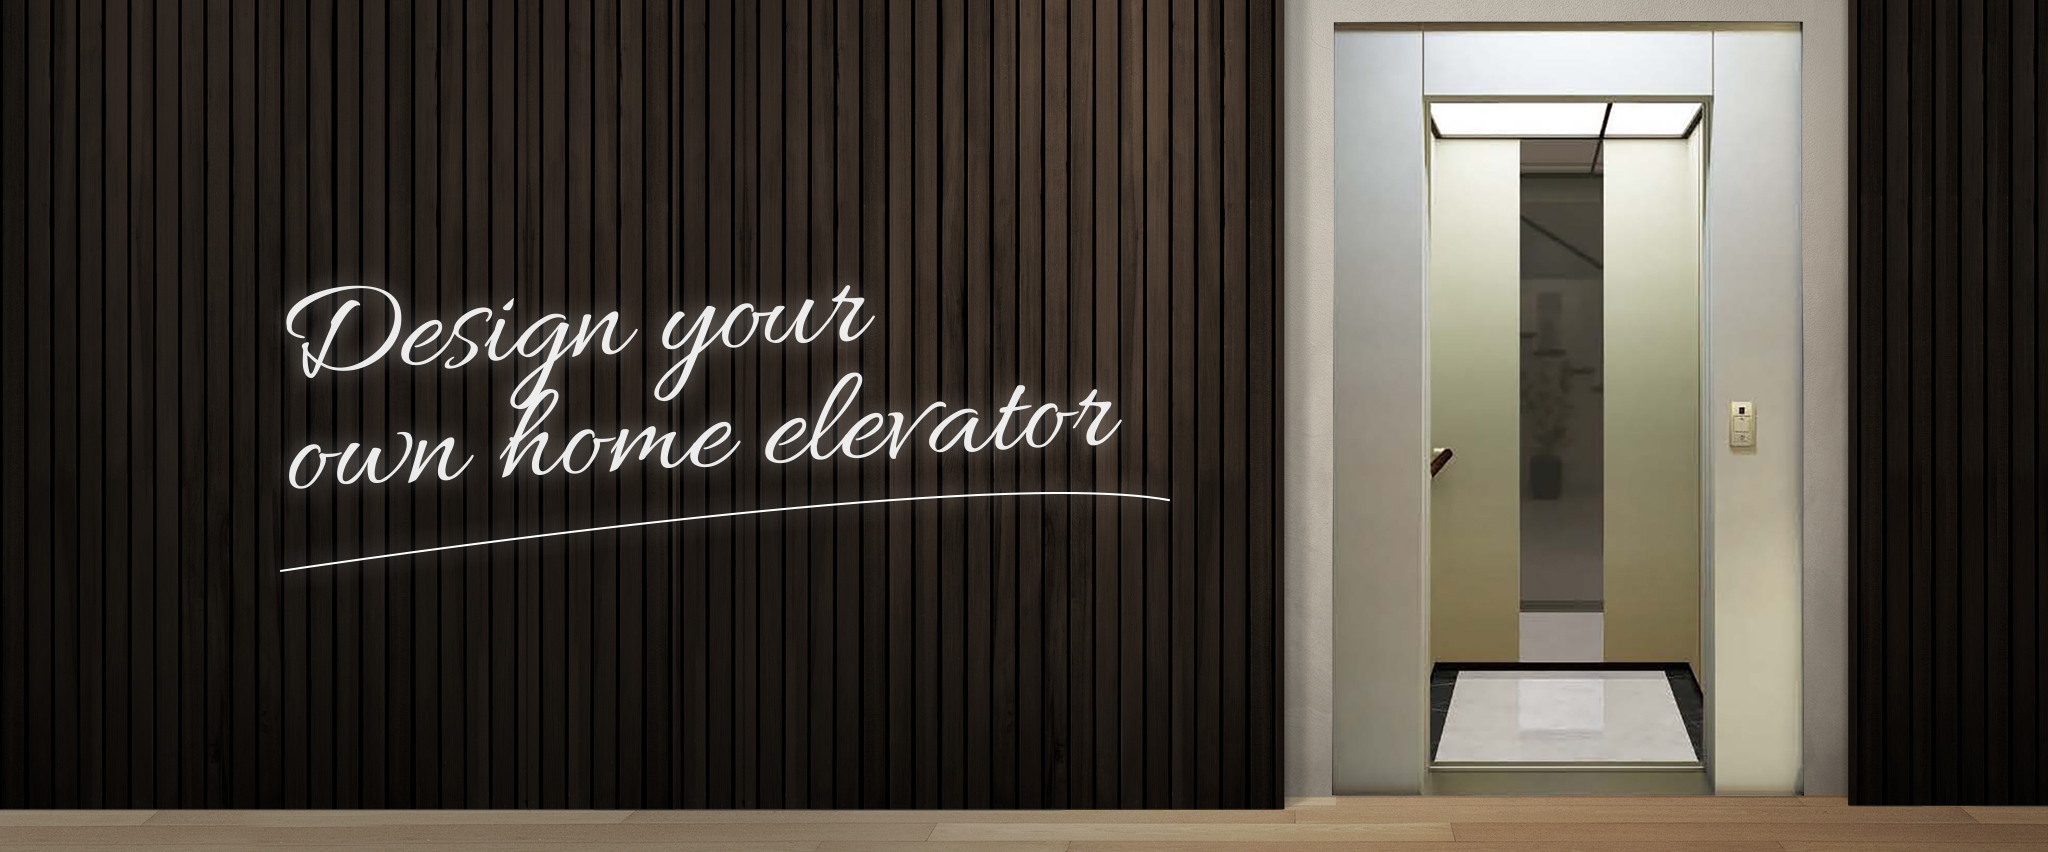 Design your own home elevator